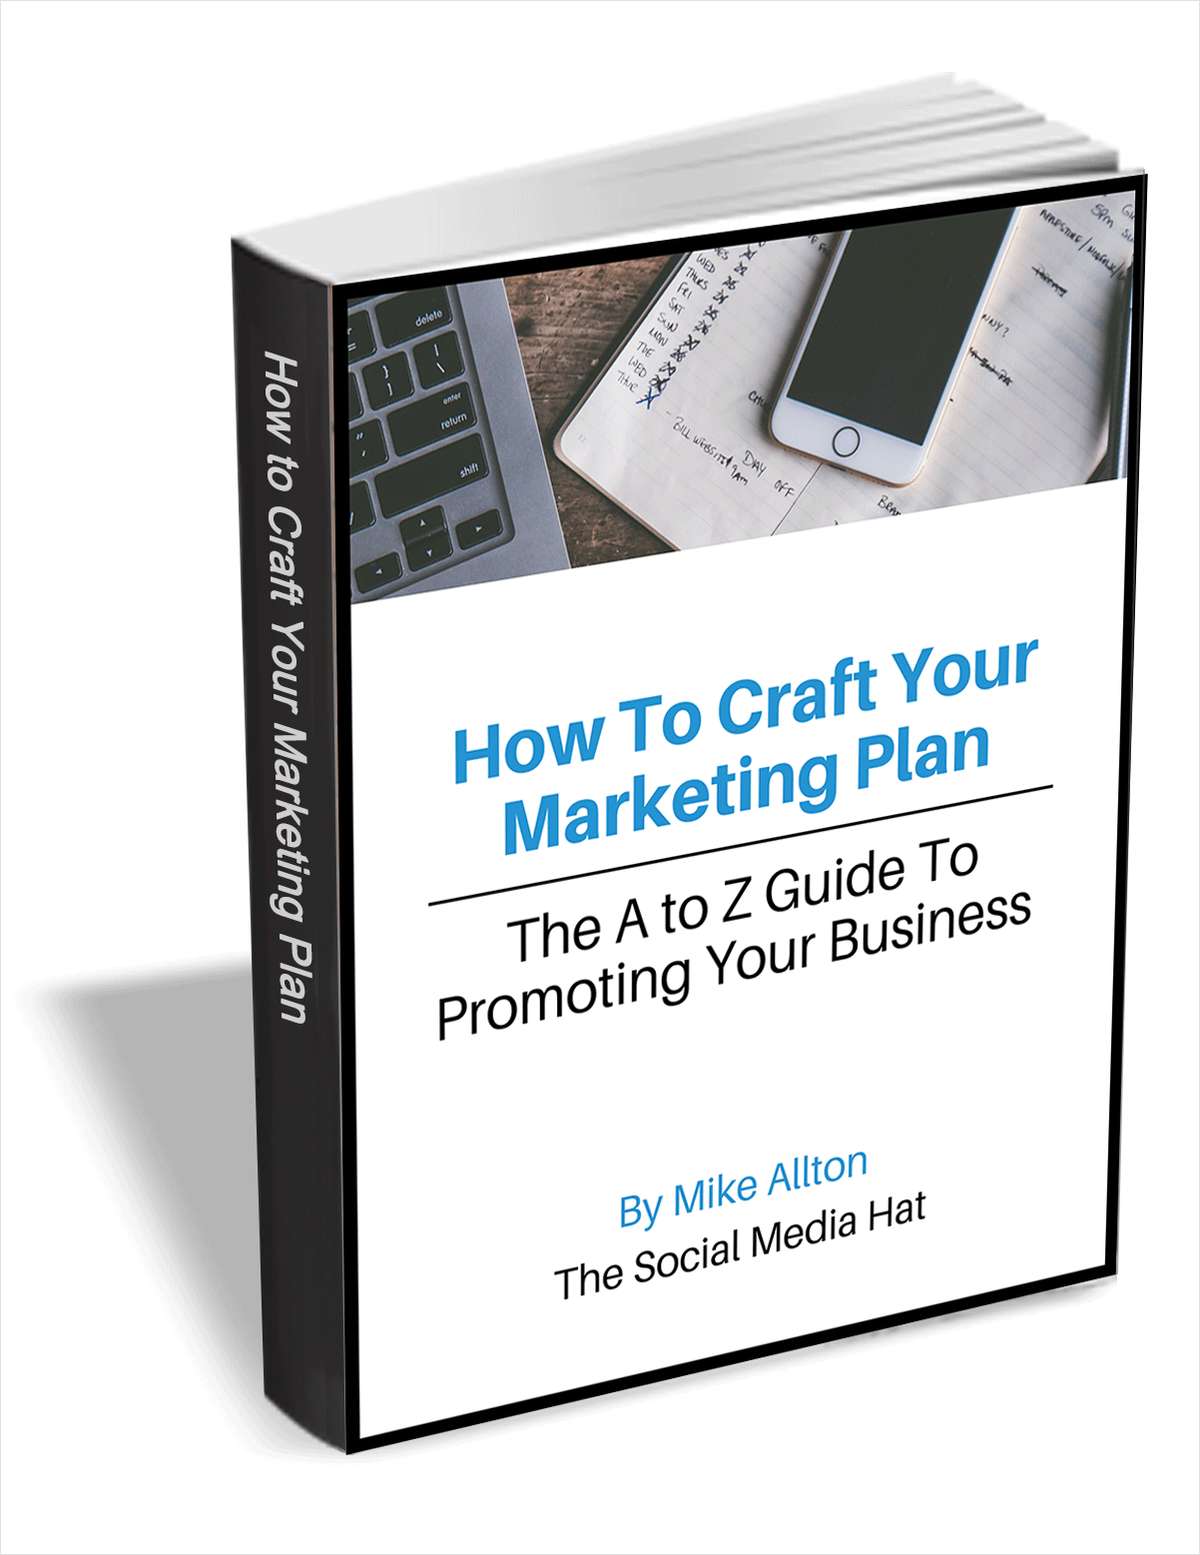 How To Craft Your Marketing Plan - The A to Z Guide To Promoting Your Business